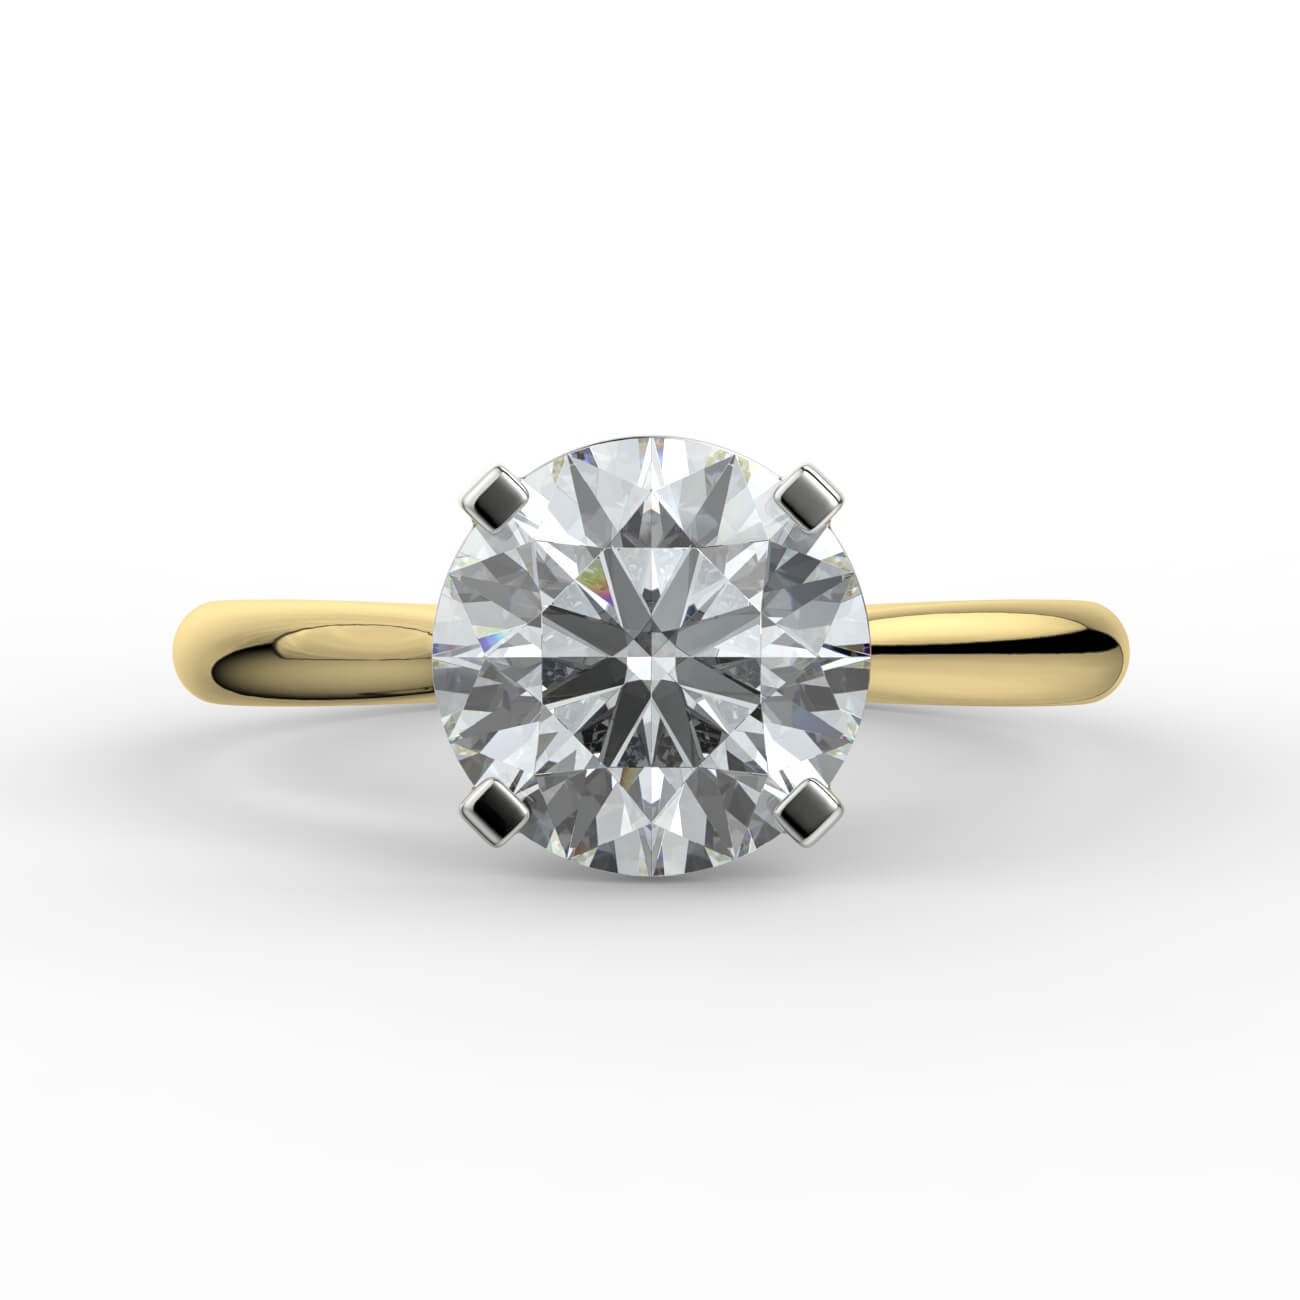 Round brilliant cut diamond cathedral engagement ring in white and yellow gold – Australian Diamond Network